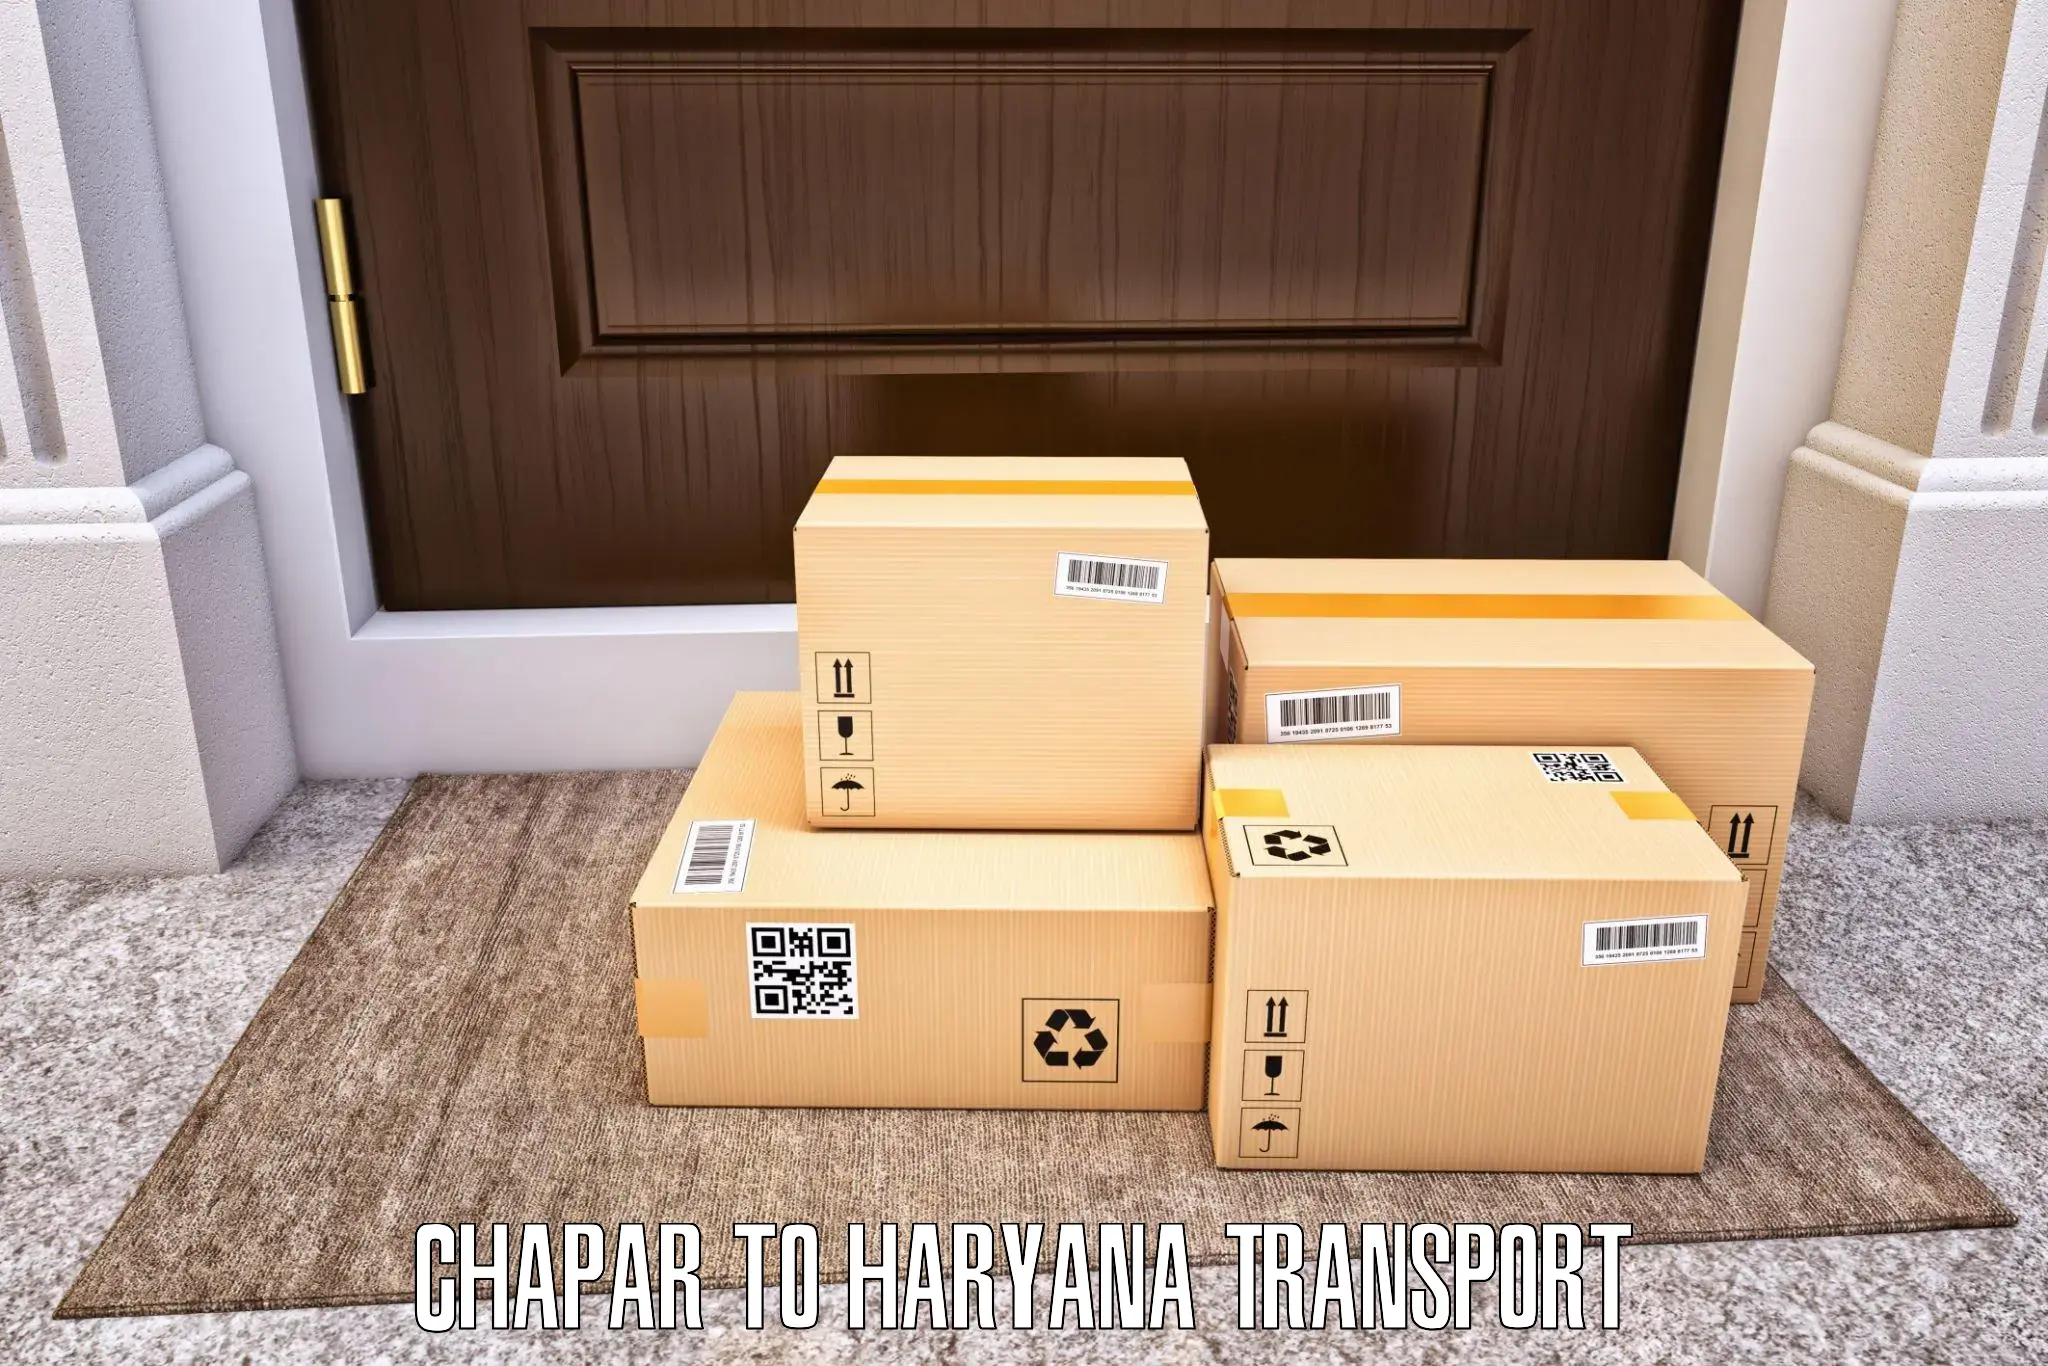 Daily transport service Chapar to Hodal